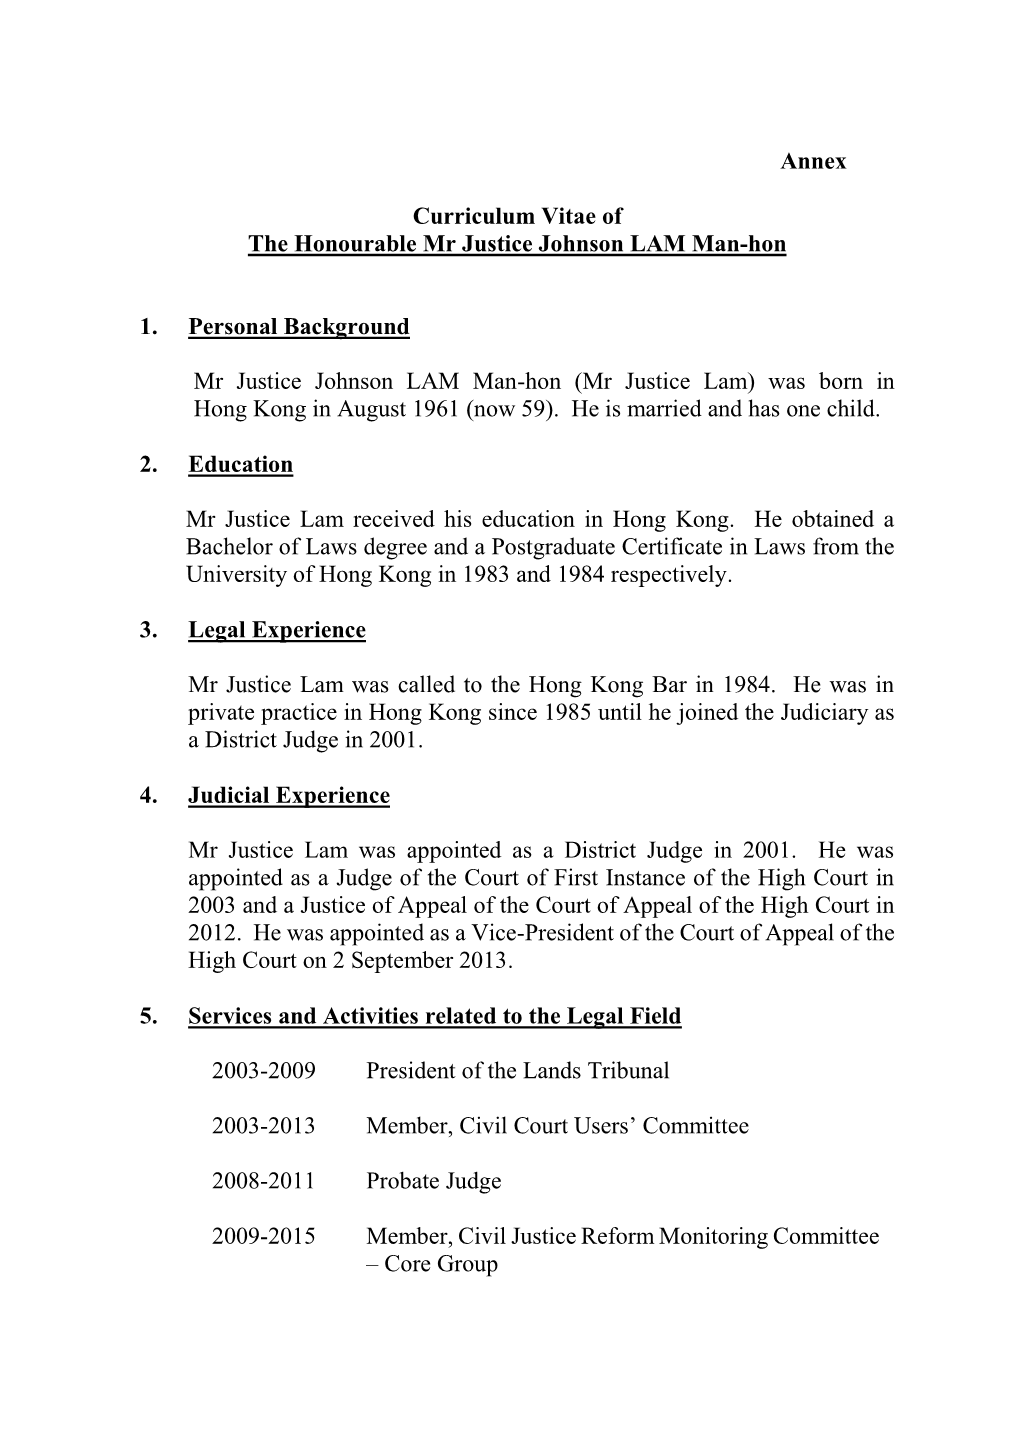 Annex Curriculum Vitae of the Honourable Mr Justice Johnson LAM Man-Hon 1. Personal Background Mr Justice Johnson LAM Man-Hon (